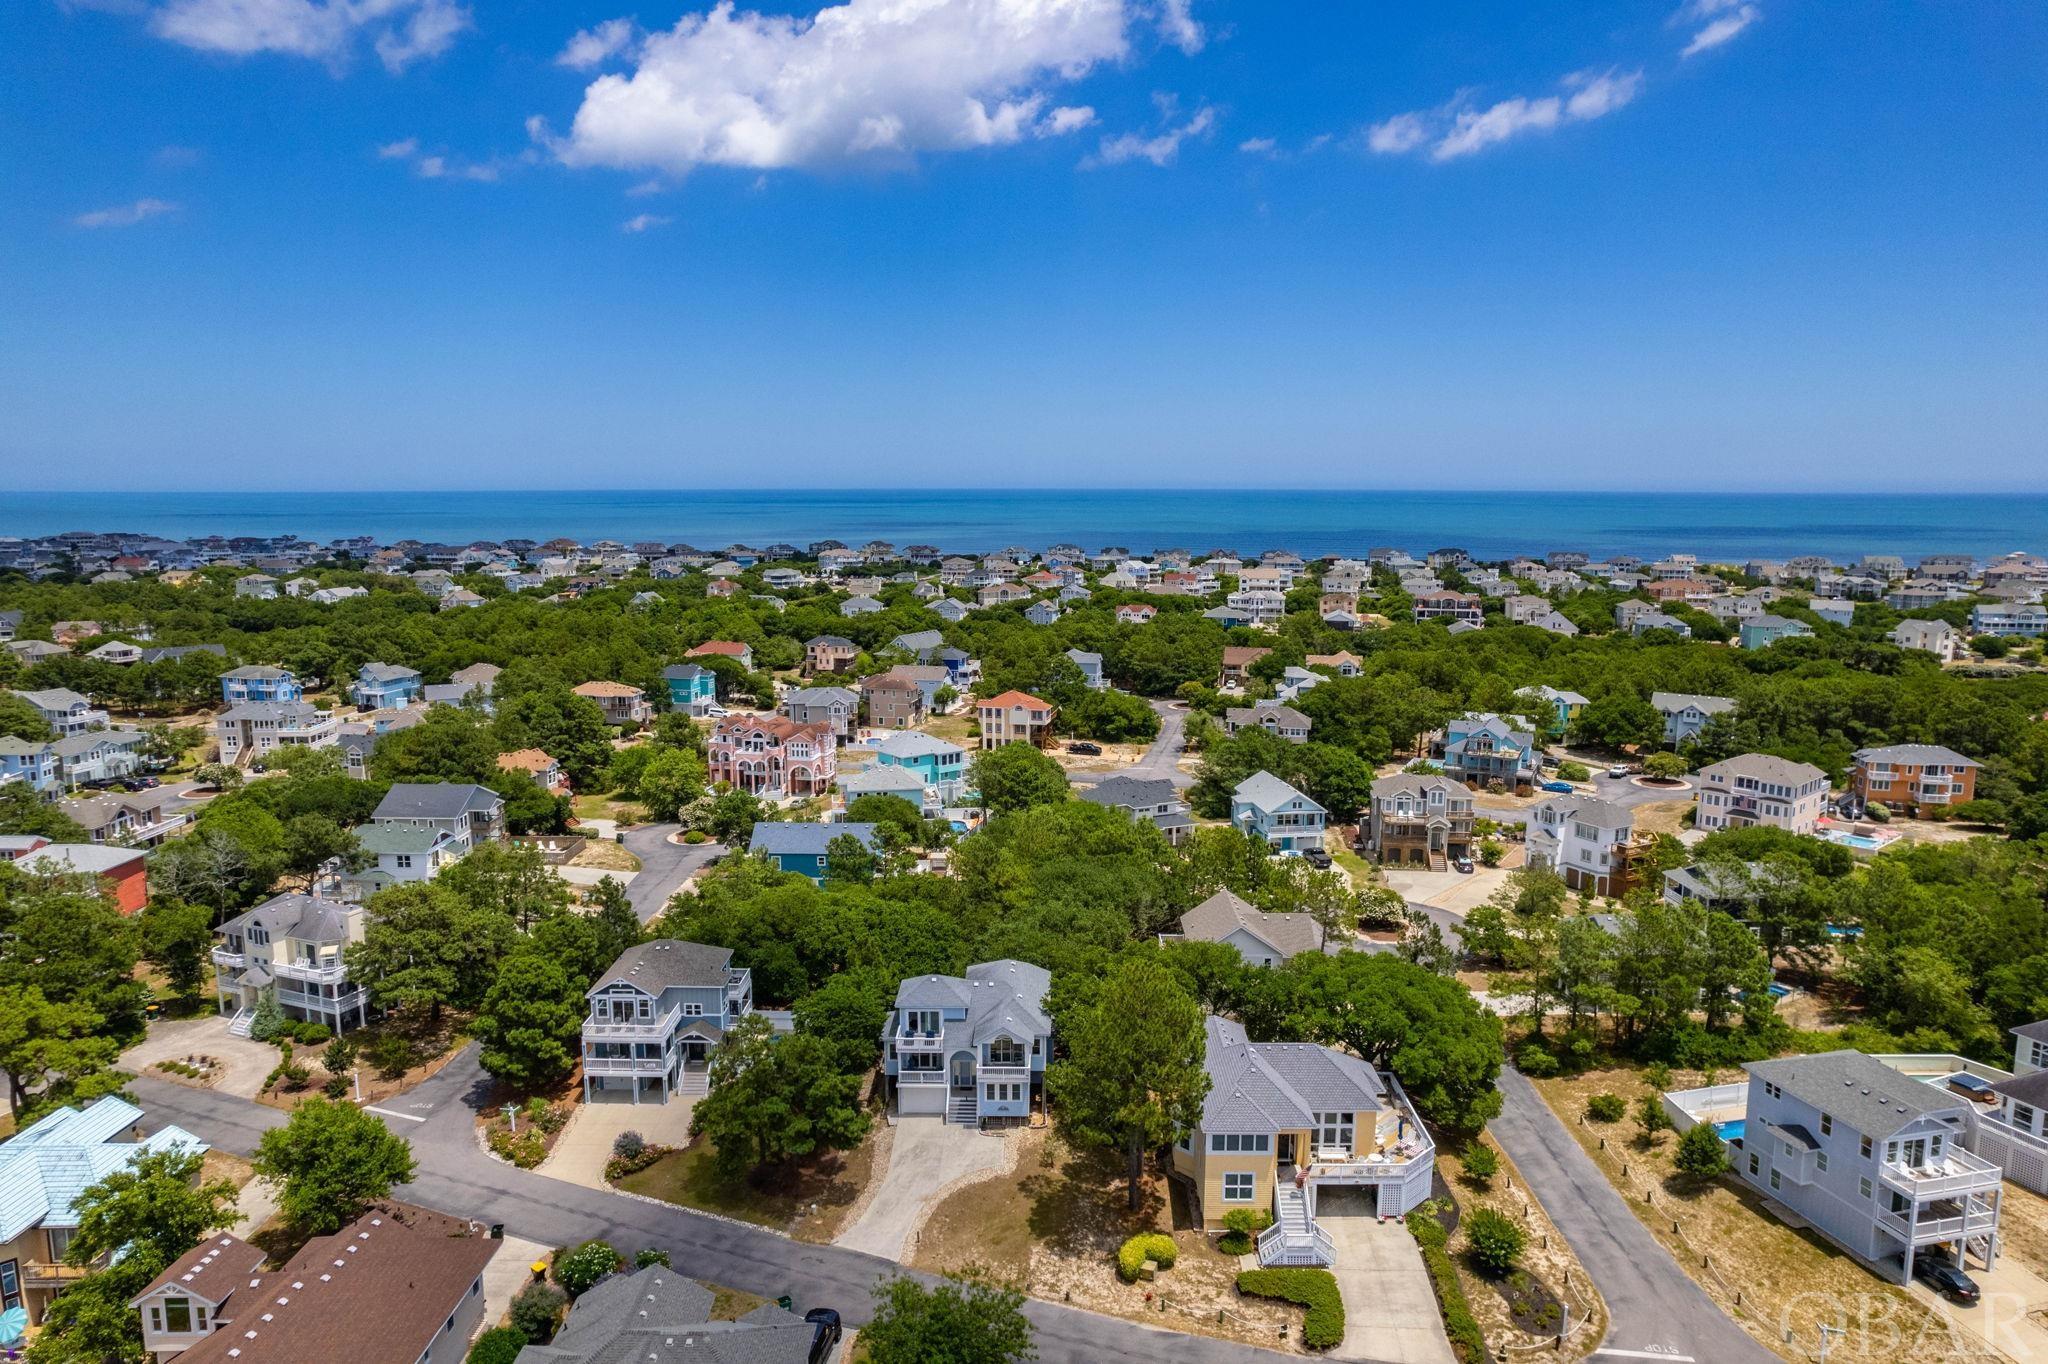 869 Drifting Sands Drive, Corolla, NC 27927, 3 Bedrooms Bedrooms, ,2 BathroomsBathrooms,Residential,For sale,Drifting Sands Drive,126164